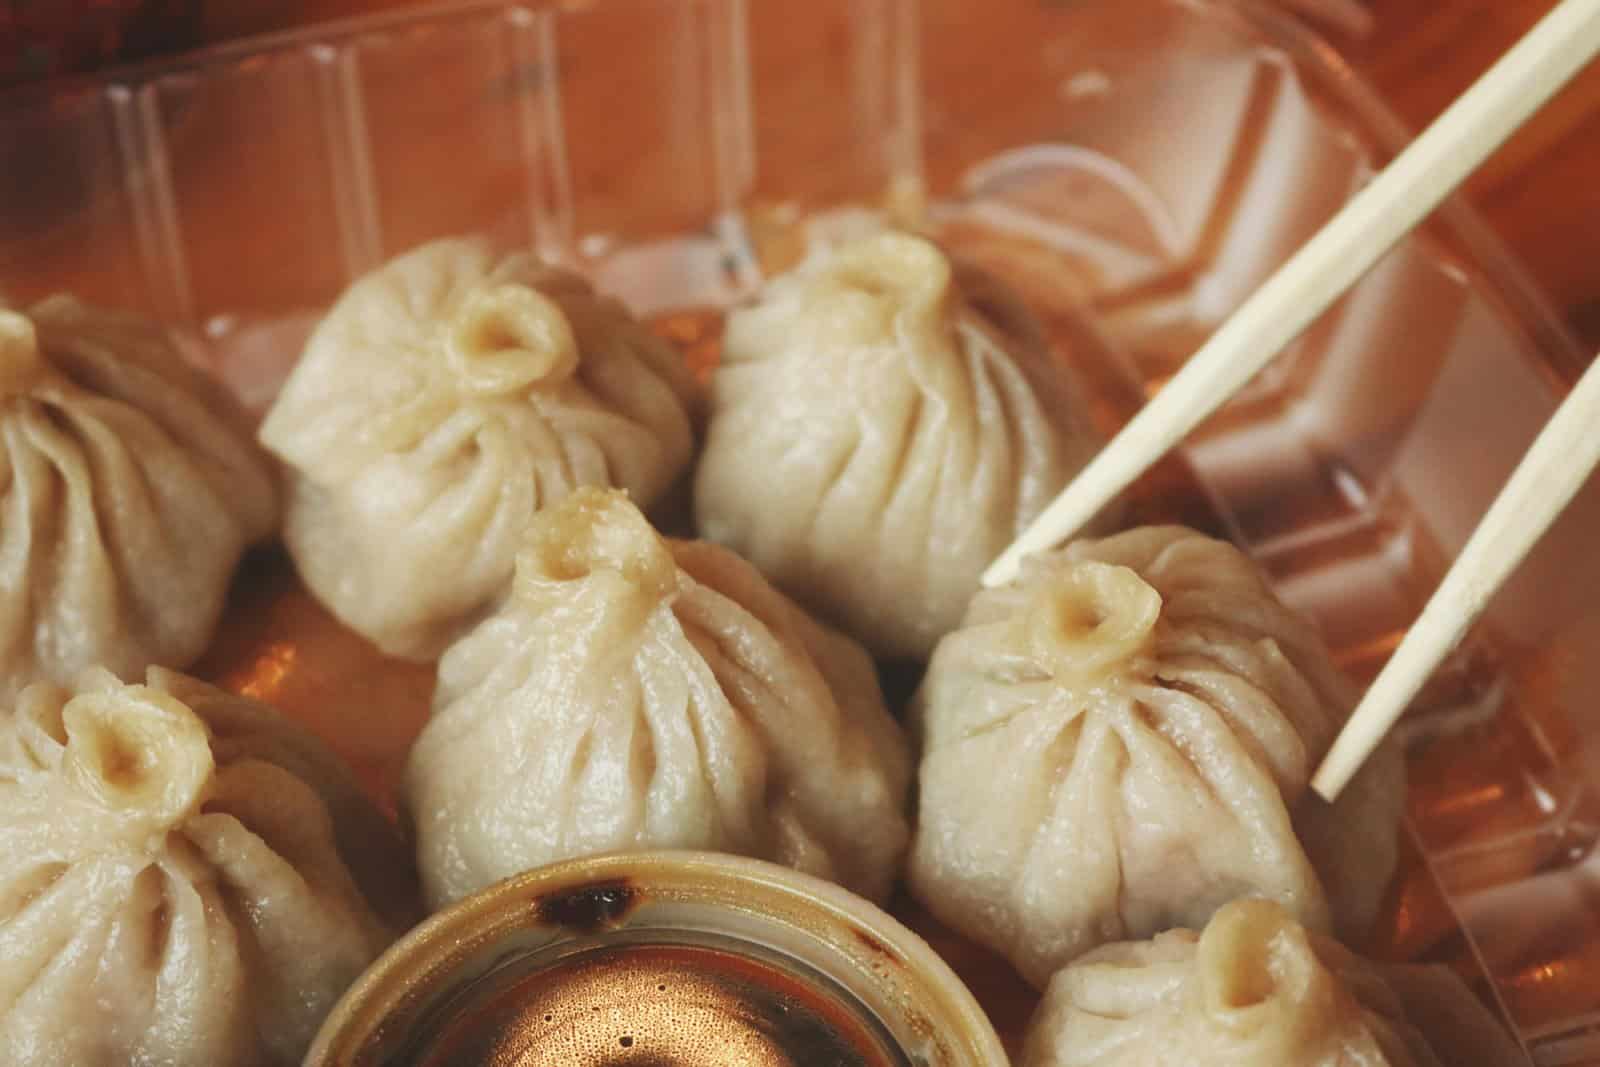 Image Credit: Pexels / Madison Inouye <p><span>Explore the flavors of Xi’an with these iconic dumplings, featuring a variety of fillings such as lamb and cumin, pork and cabbage, or beef and onion, wrapped in thin dough and steamed or fried to perfection.</span></p>